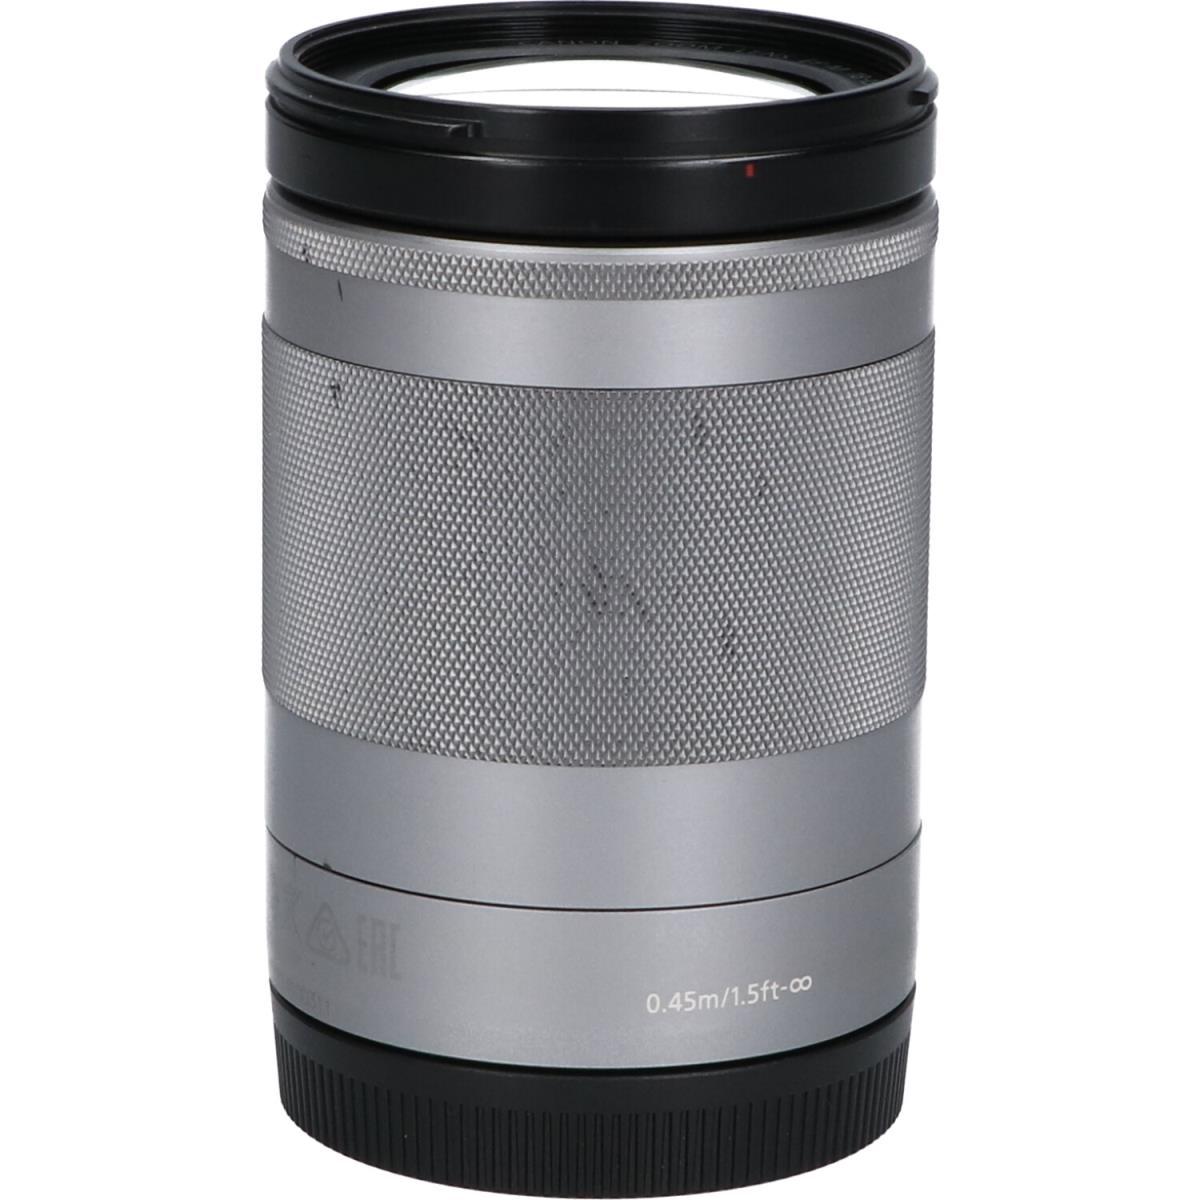 CANON EF-M18-150mm F3.5-6.3ISSTM Silver